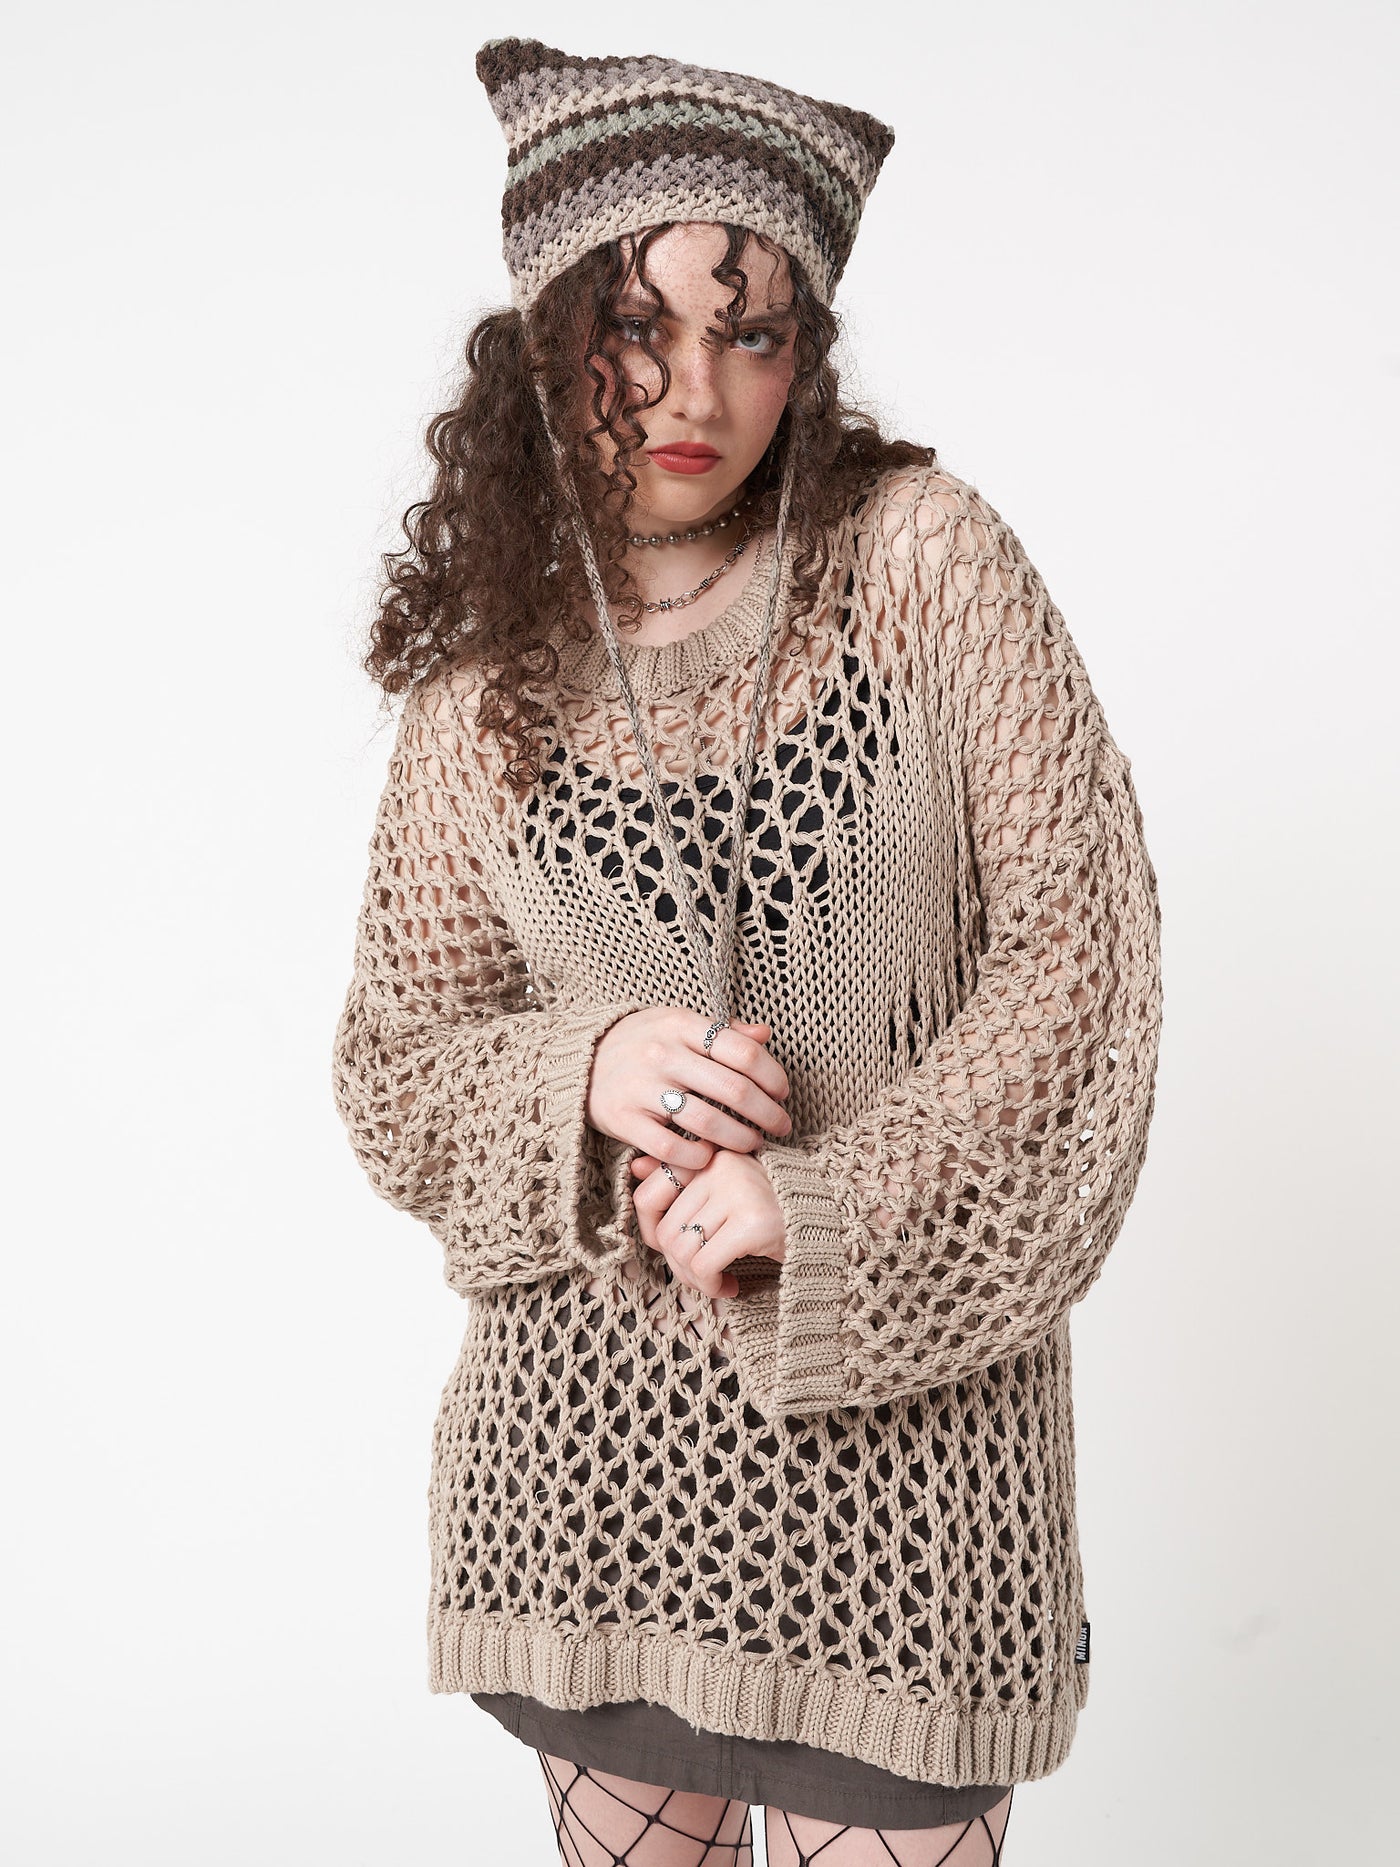 Open knit jumper in beige with butterfly front design and crochet net style